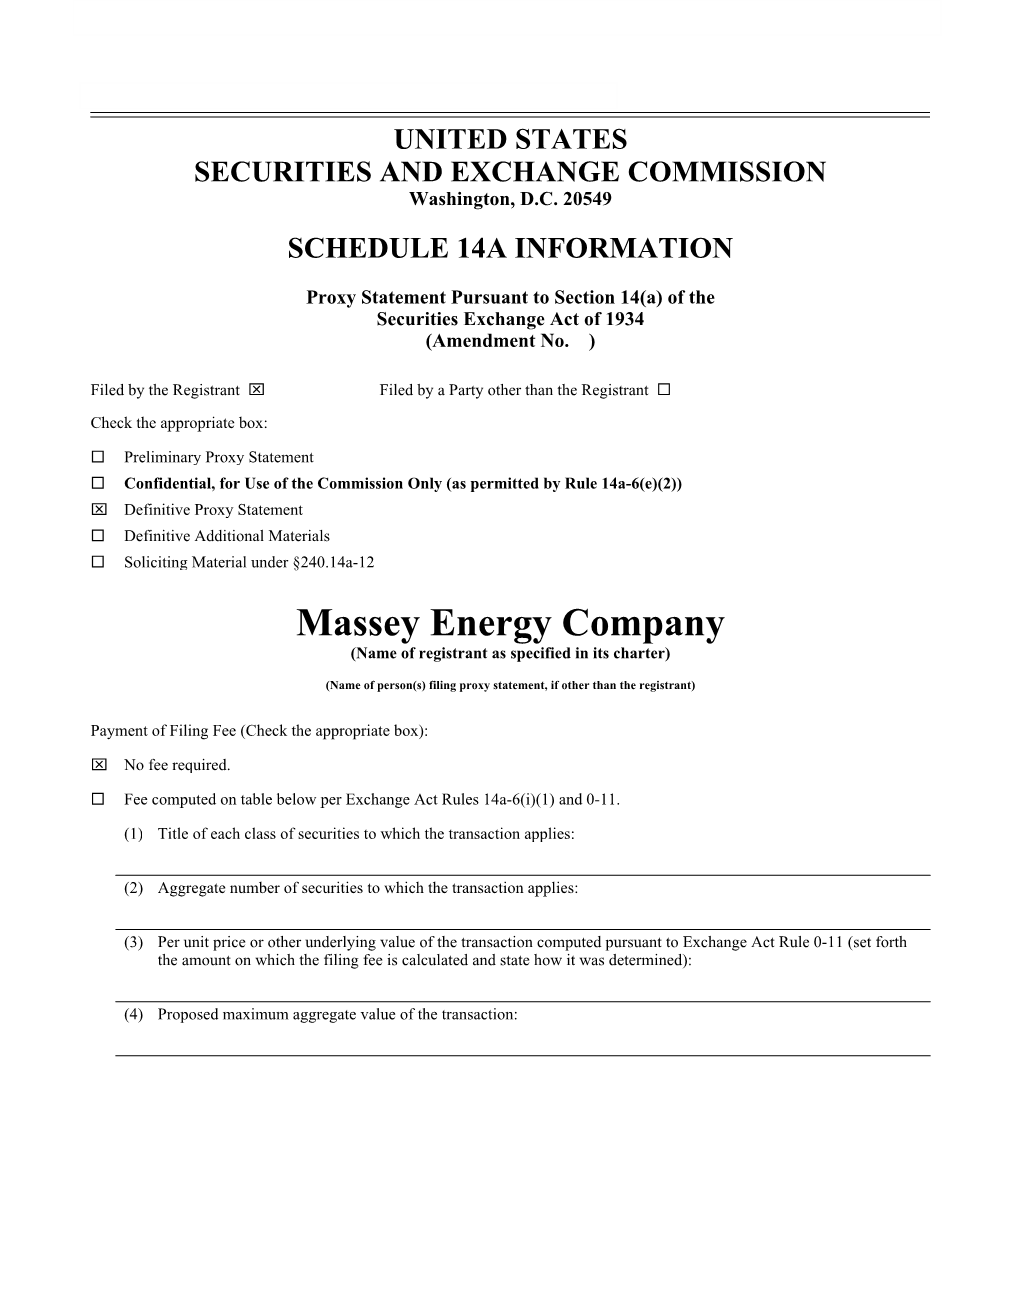 Massey Energy Company (Name of Registrant As Specified in Its Charter)